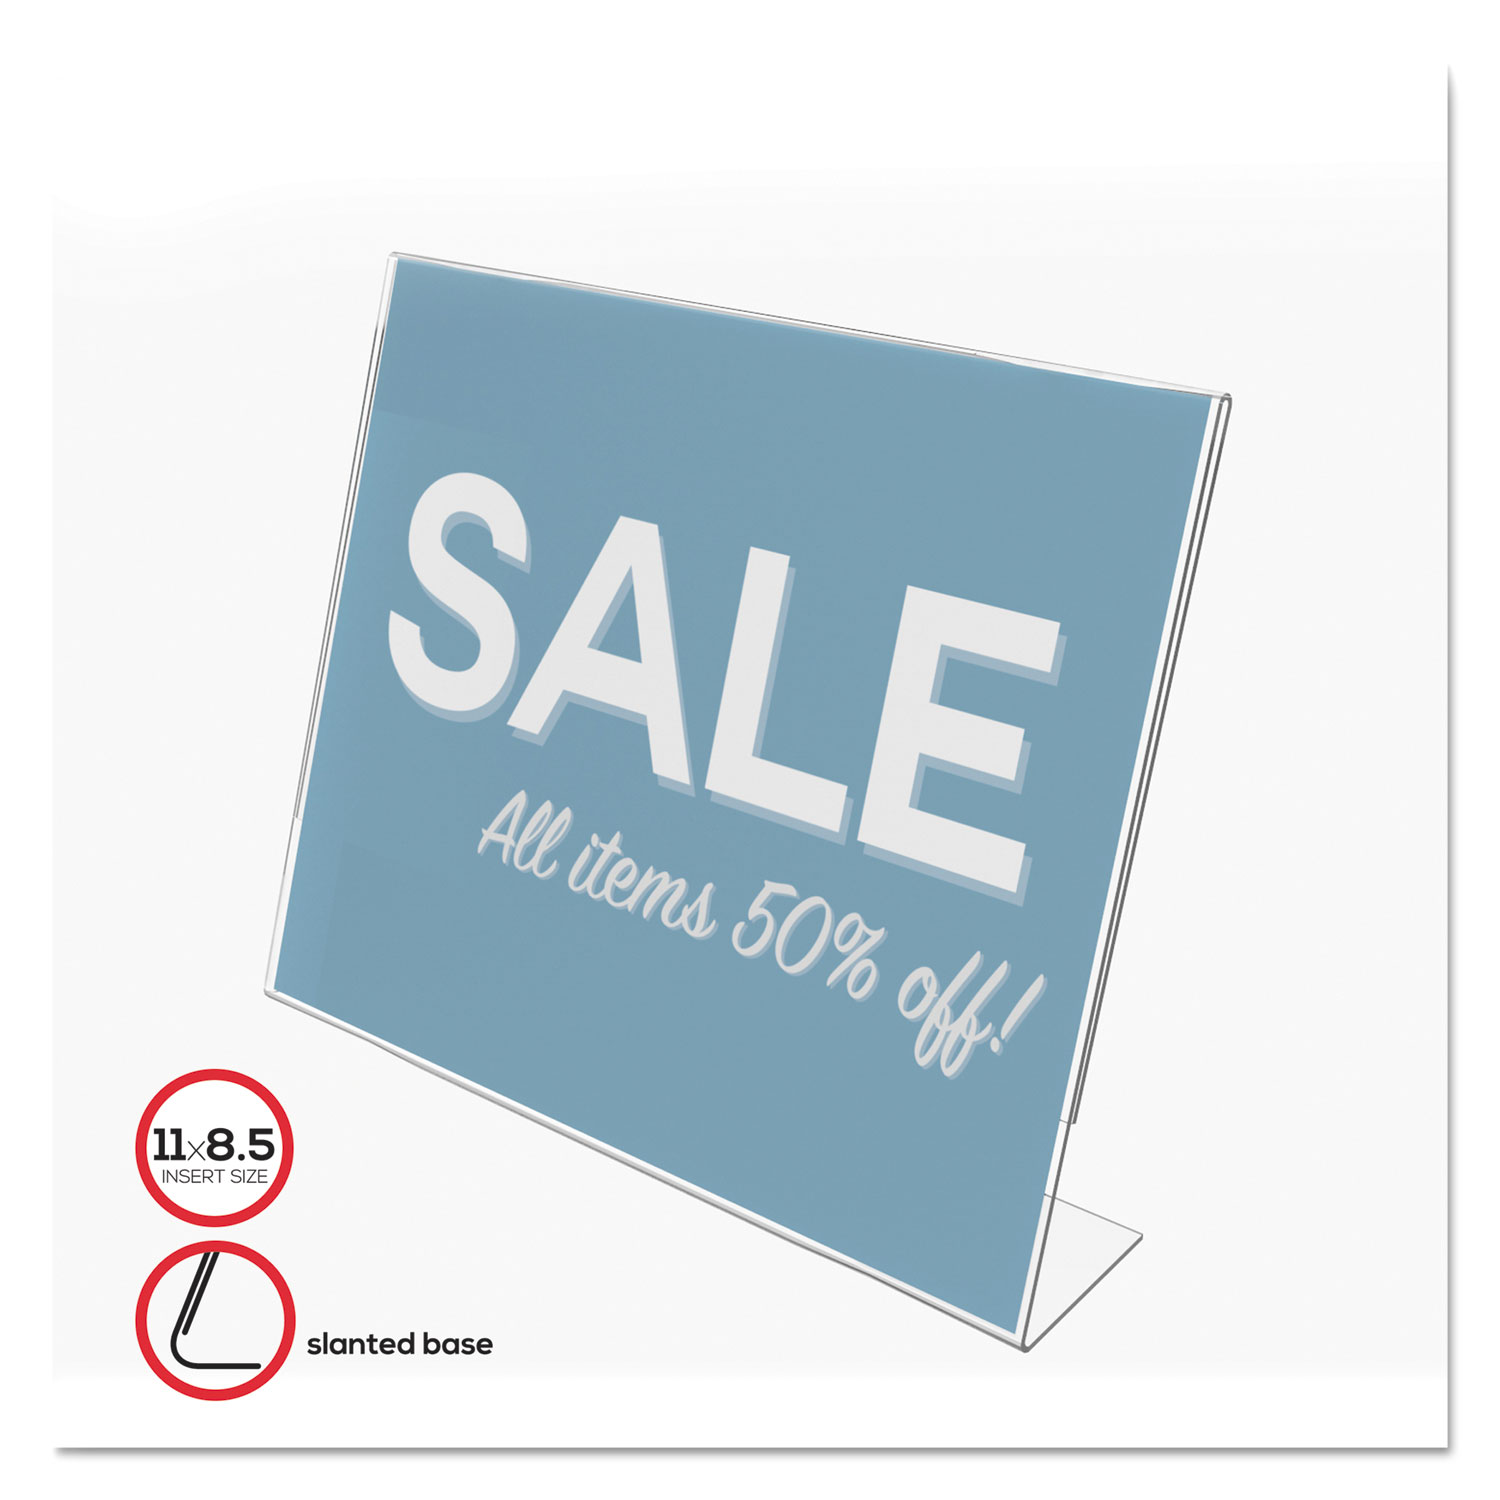  deflecto 66701 Classic Image Slanted Sign Holder, Landscaped, 11 x 8 1/2 Insert, Clear (DEF66701) 